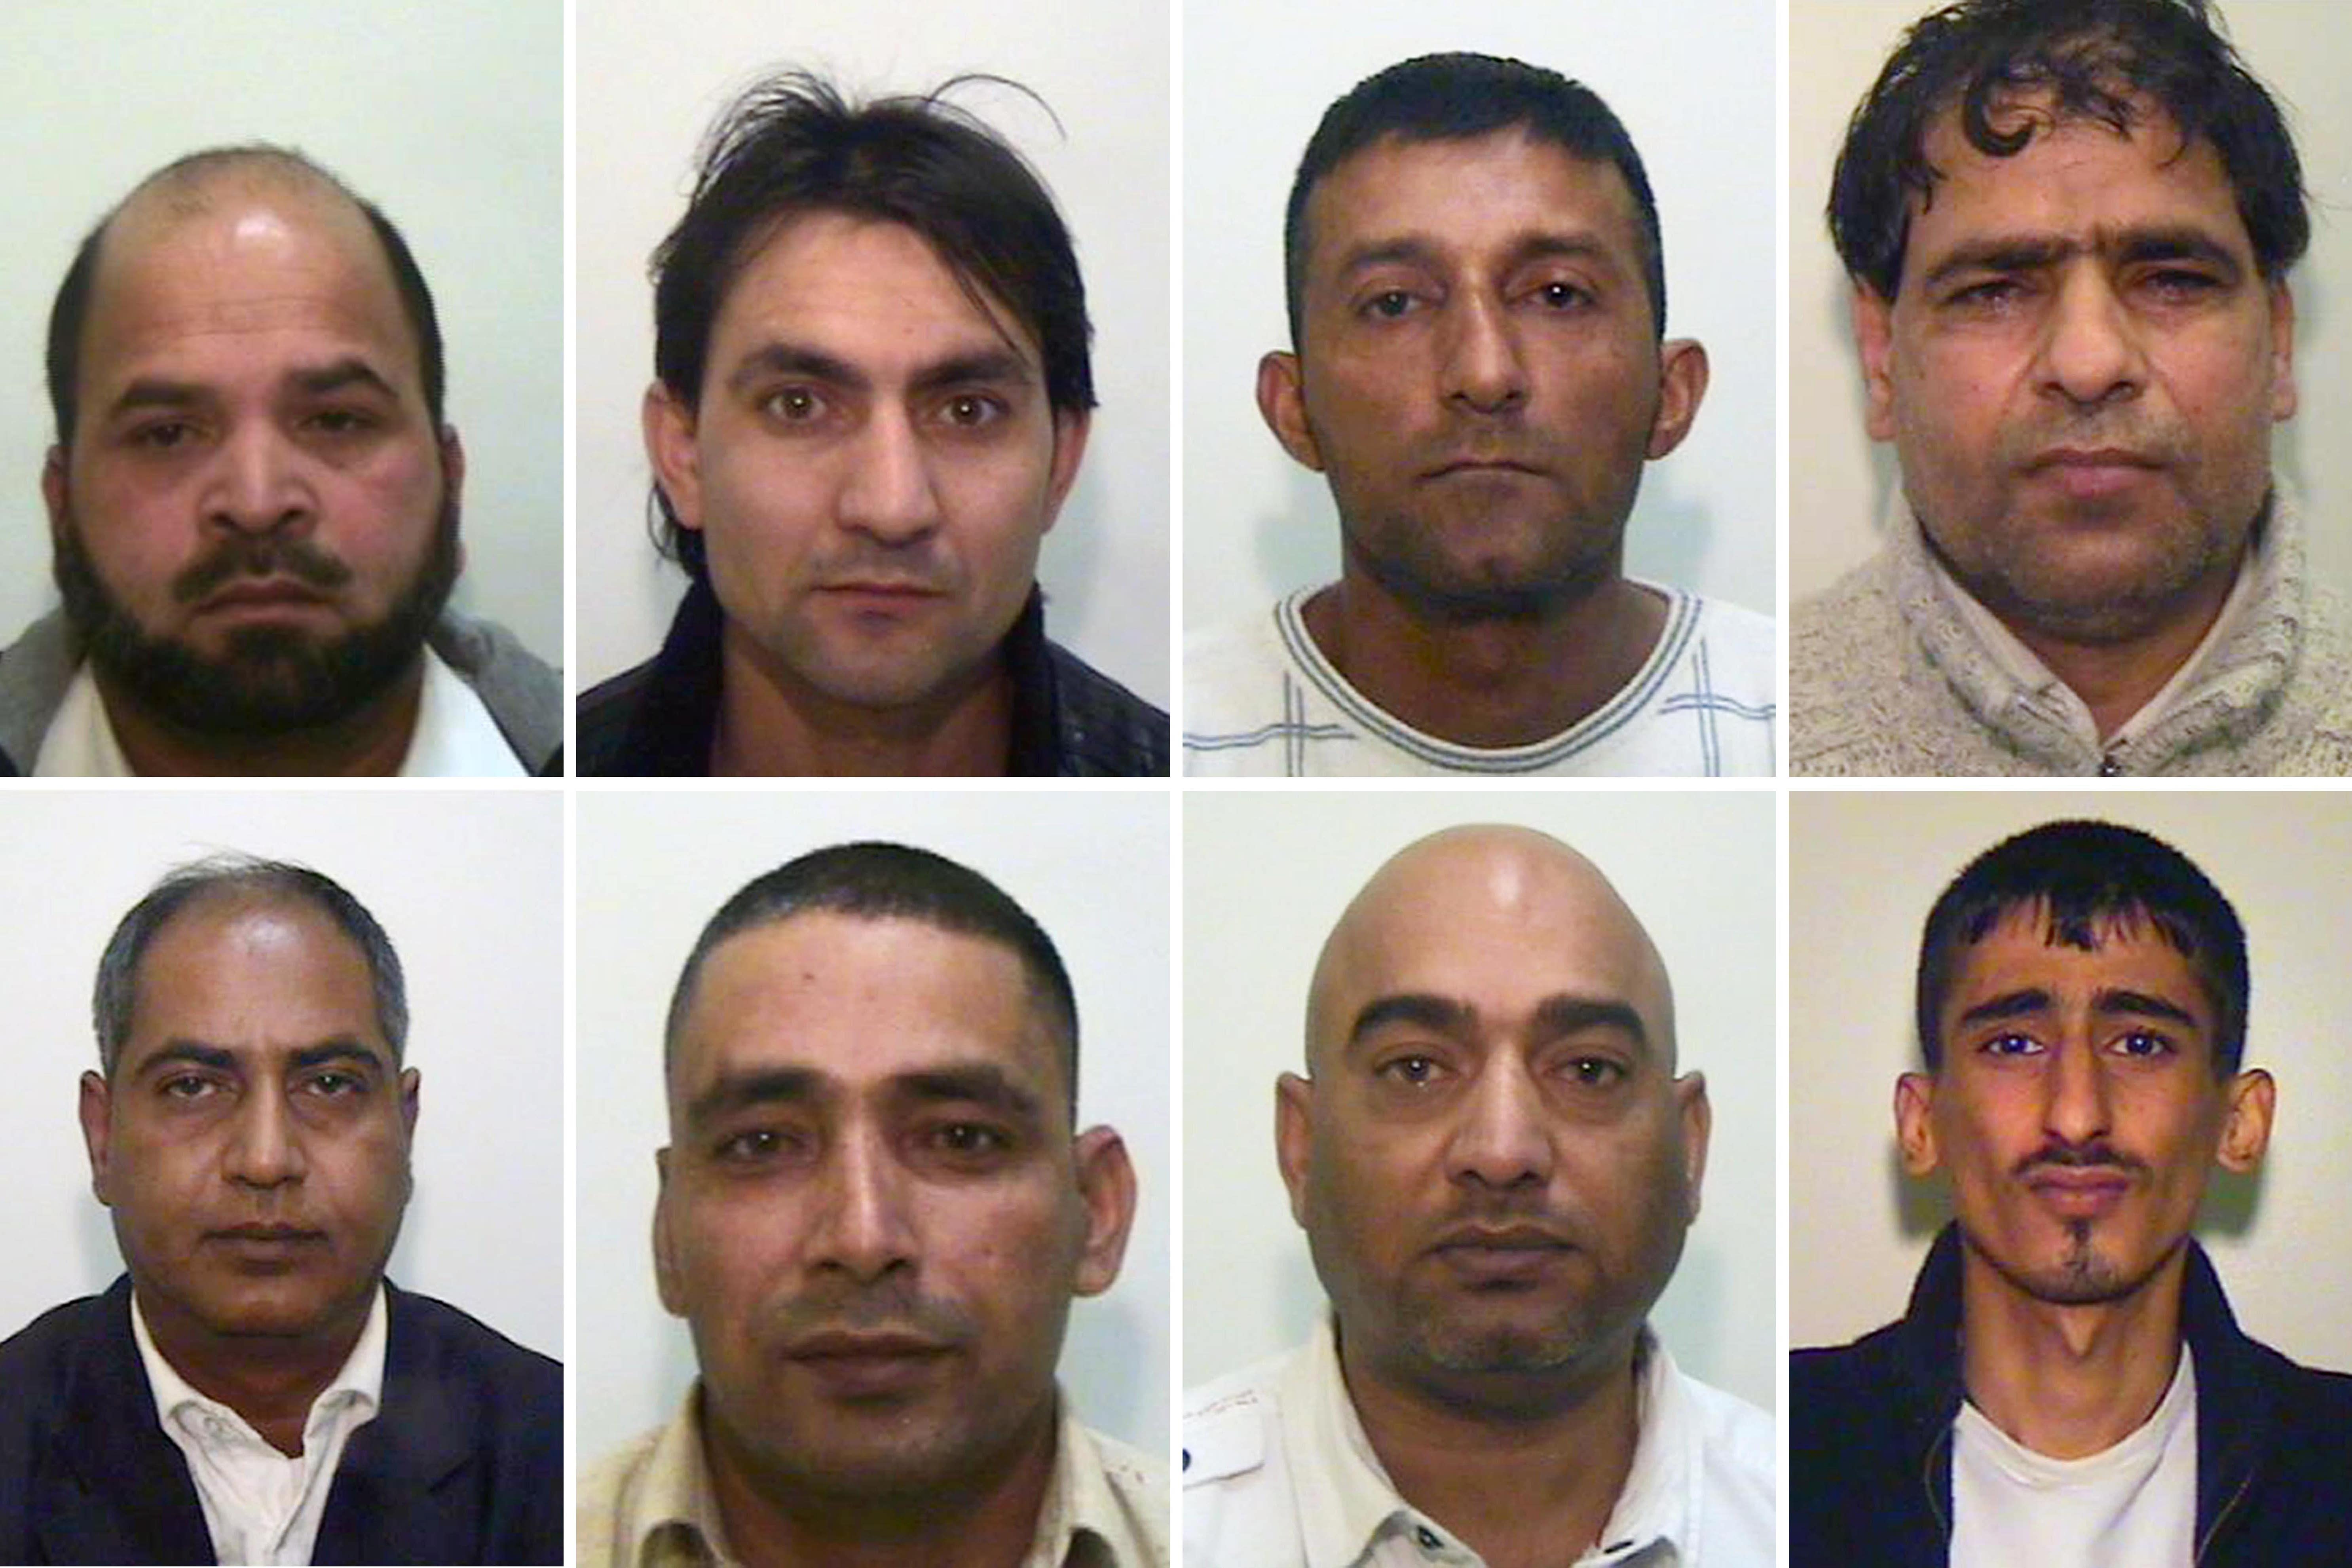 BEST QUALITY AVAILABLE. Undated handout composite photo issued by Greater Manchester Police of (top row left to right) Abdul Rauf, Hamid Safi, Mohammed Sajid and Abdul Aziz; (Bottom row left to right) Abdul Qayyum, Adil Khan, Mohammed Amin and Kabeer Hassan who were found guilty of conspiracy and rape.